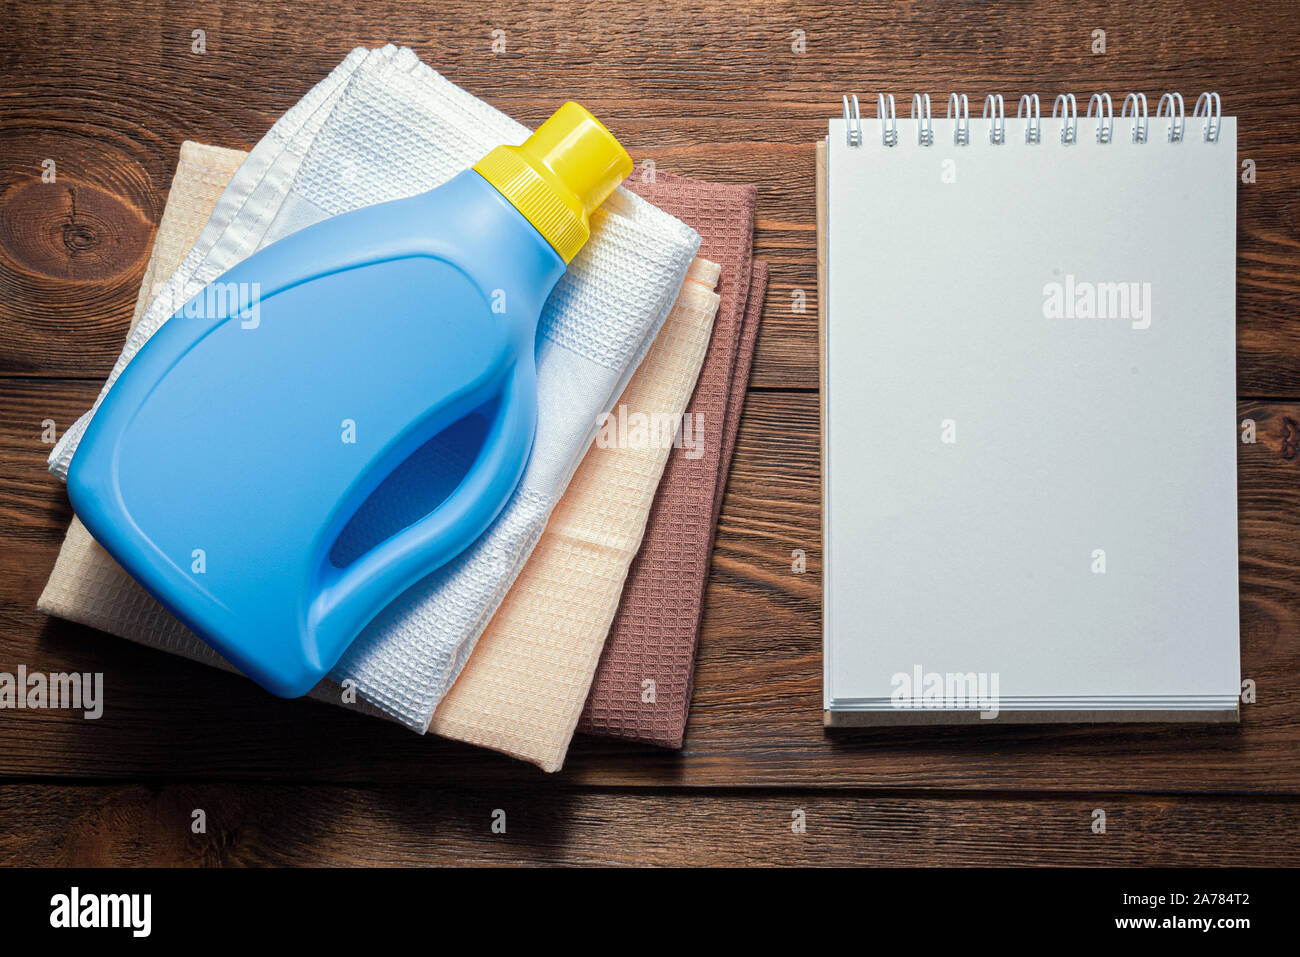 Washing supply, softener, detergent, dish cloth and blank page notepad on wooden table. Household tips mock up. Stock Photo